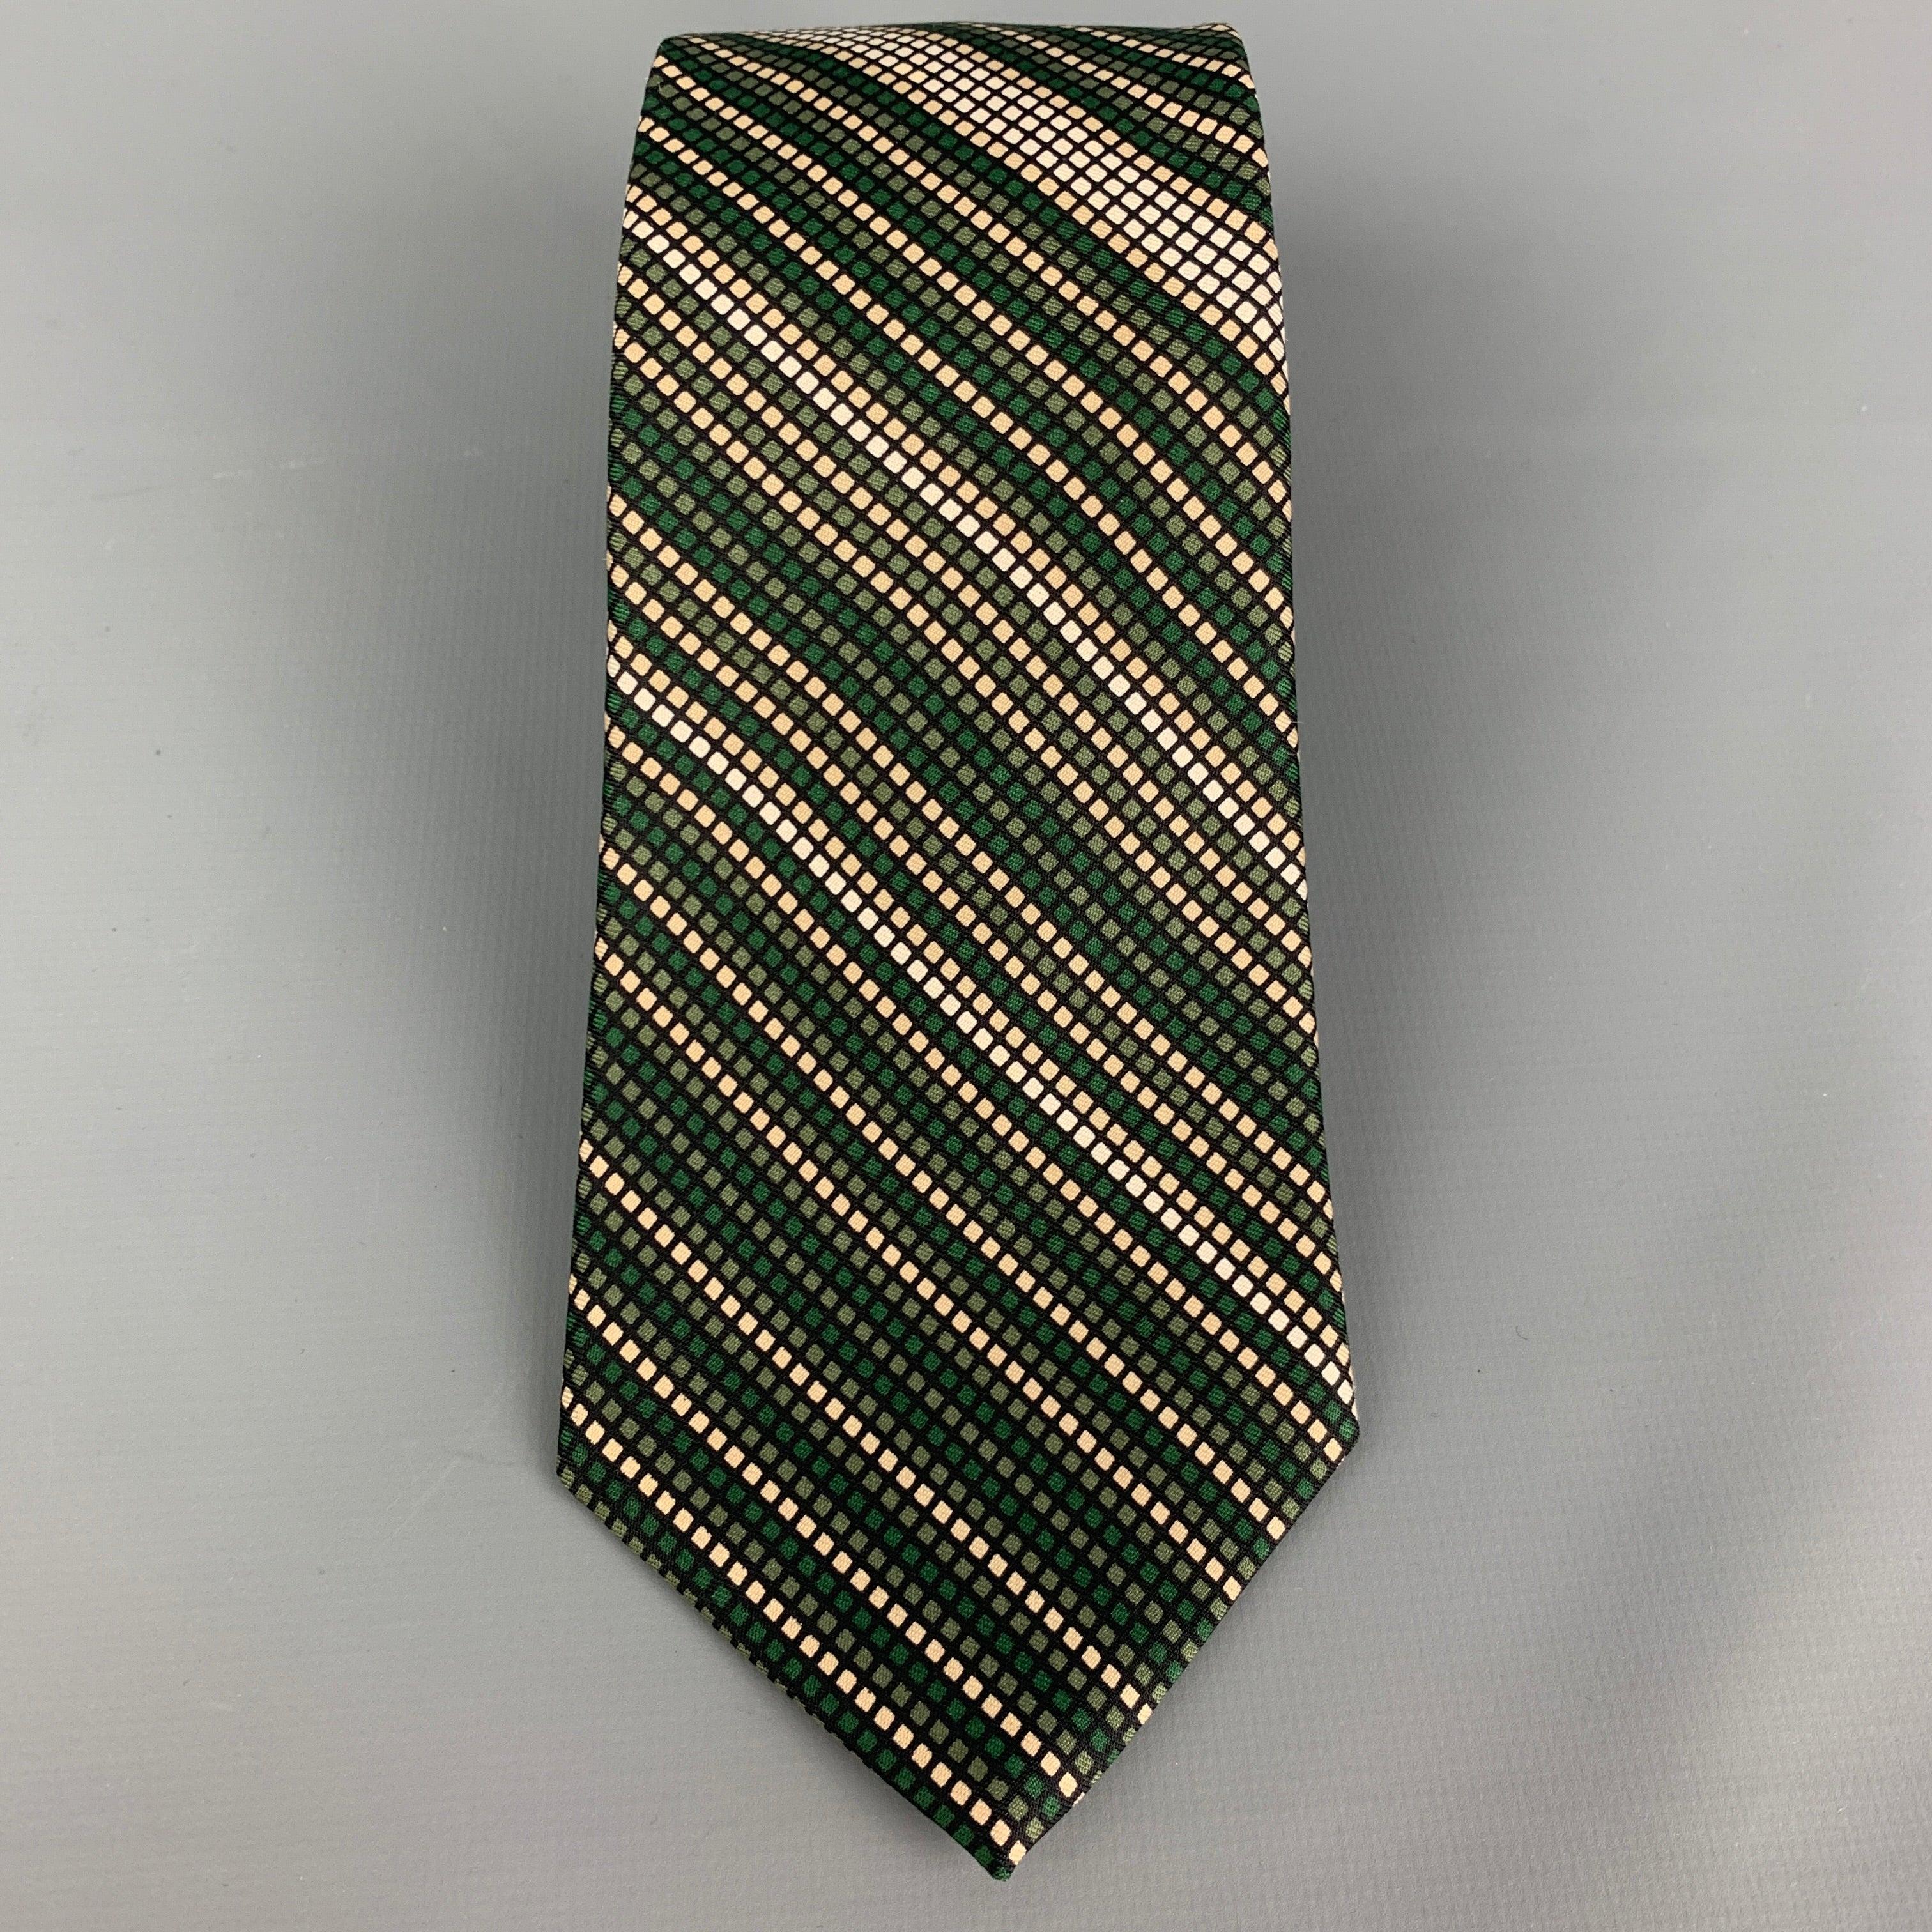 YVES SAINT LAURENT
necktie comes in a green & white silk twill with a all over checkered print.  Very Good Pre-Owned Condition.Width: 3.25 inches 
  
  
 
Reference: 117583
Category: Tie
More Details
    
Brand:  YVES SAINT LAURENT
Color: 